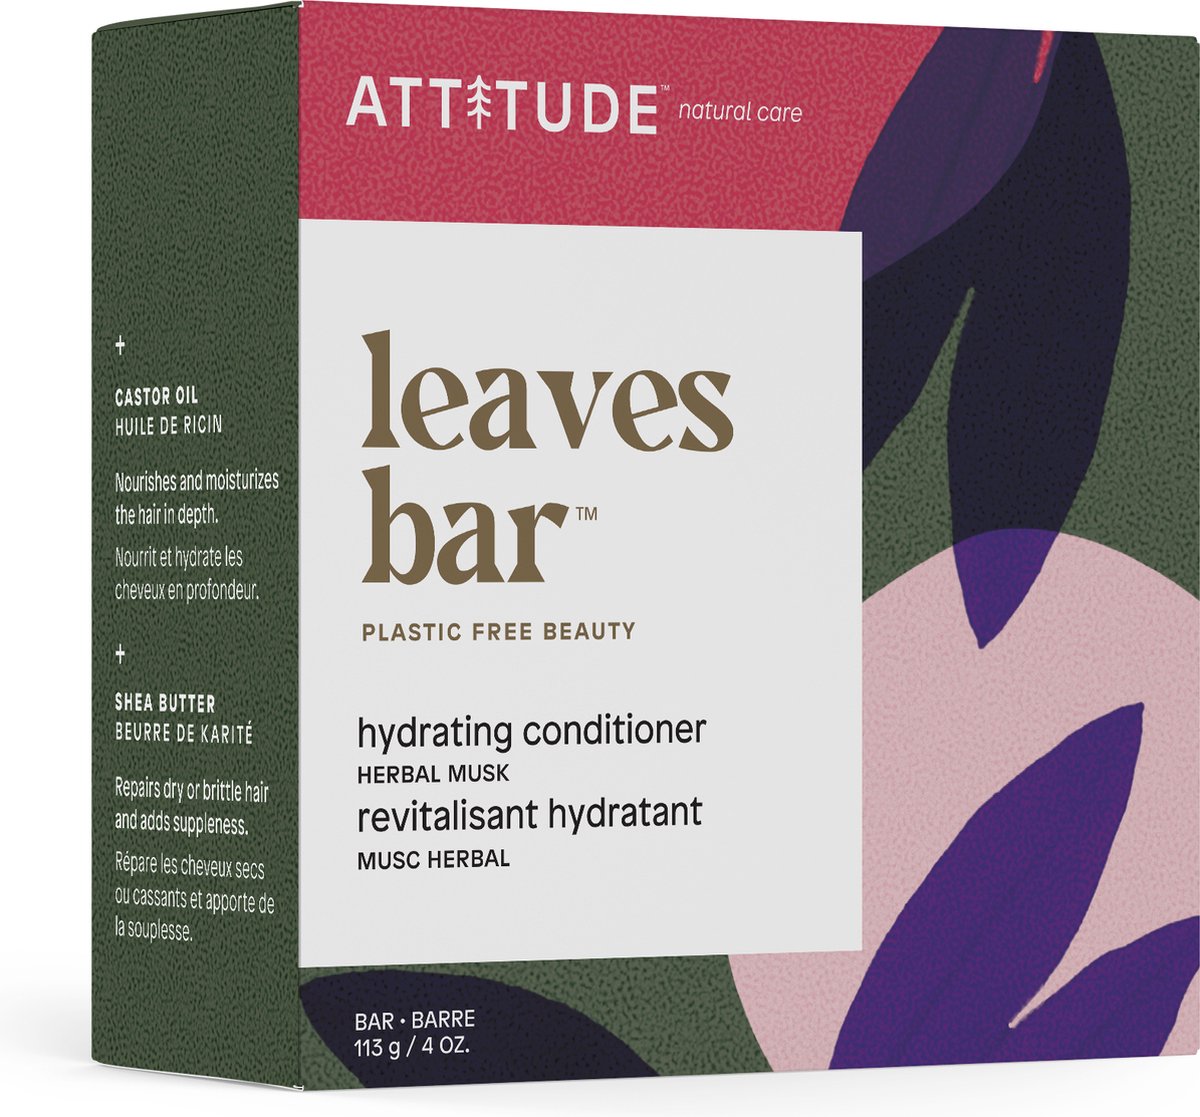 Attitude leaves bar Hydrating conditioner